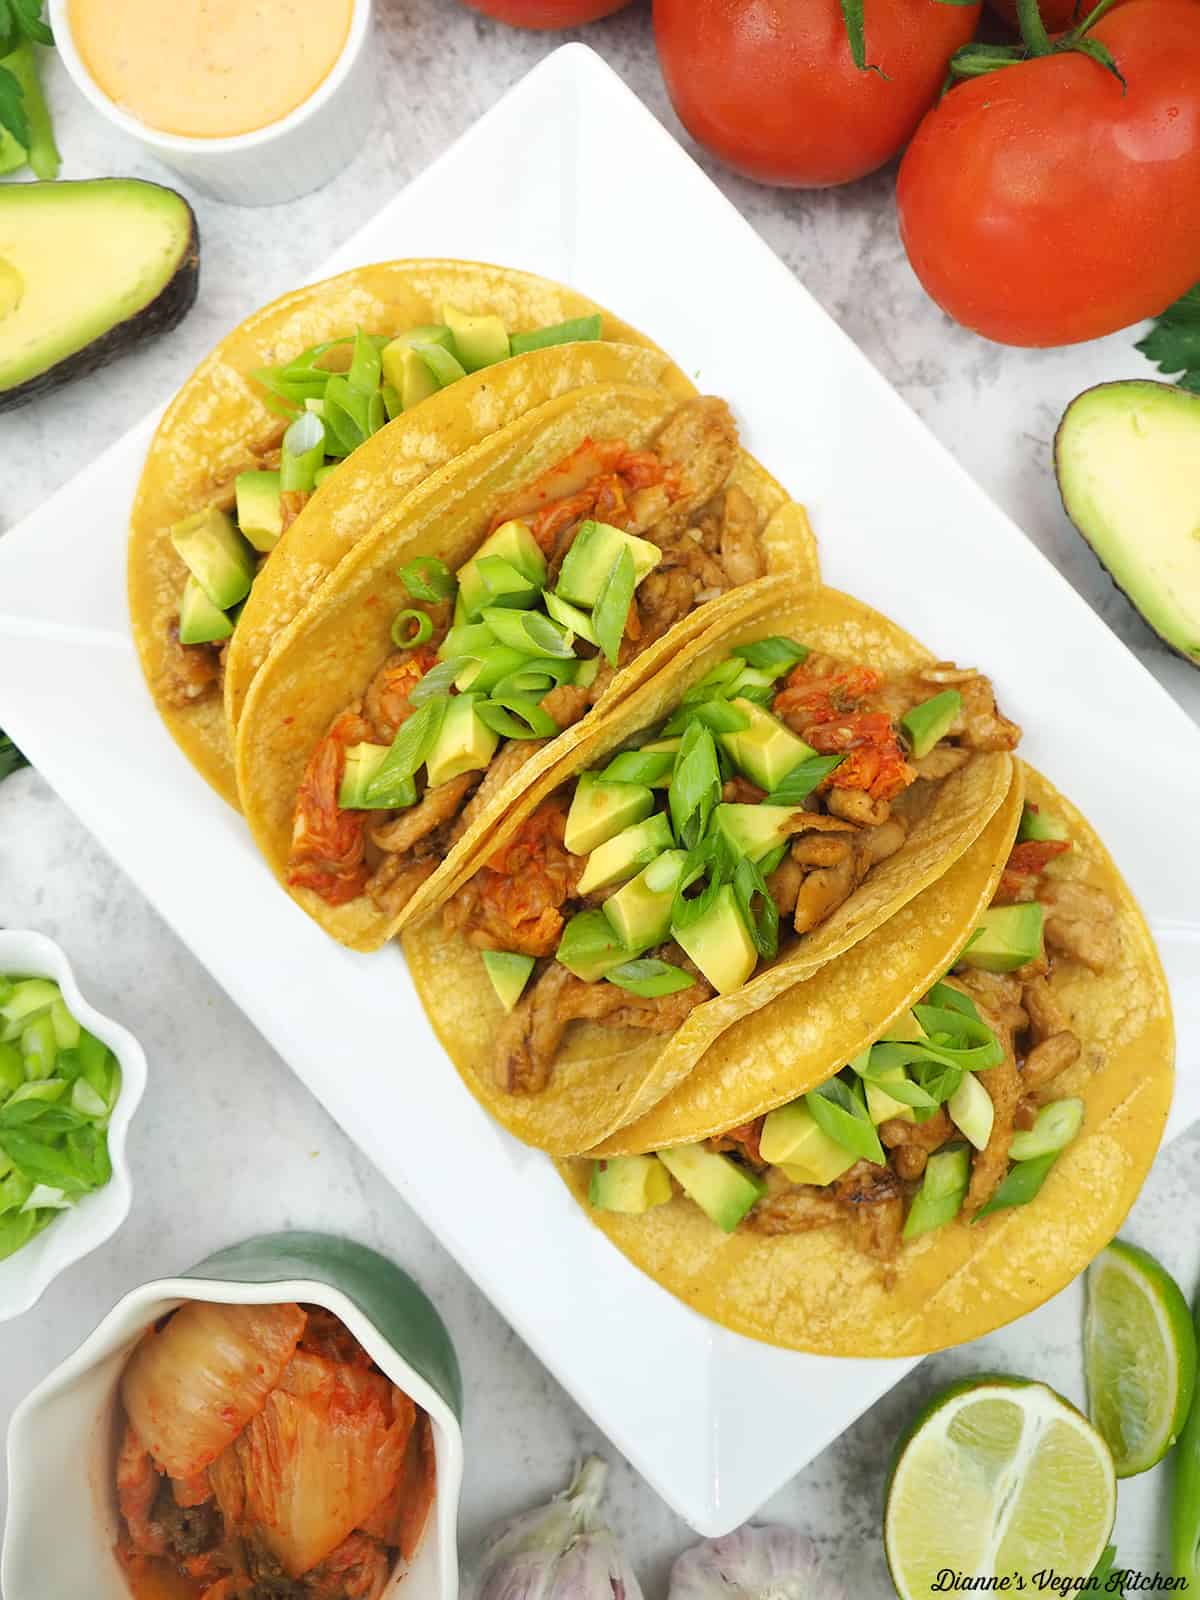 Soy Curl and Kimchi Tacos on platter with tomatoes, scallions, limes, spicy mayo, scallions, garlic, kimchi, and avocado